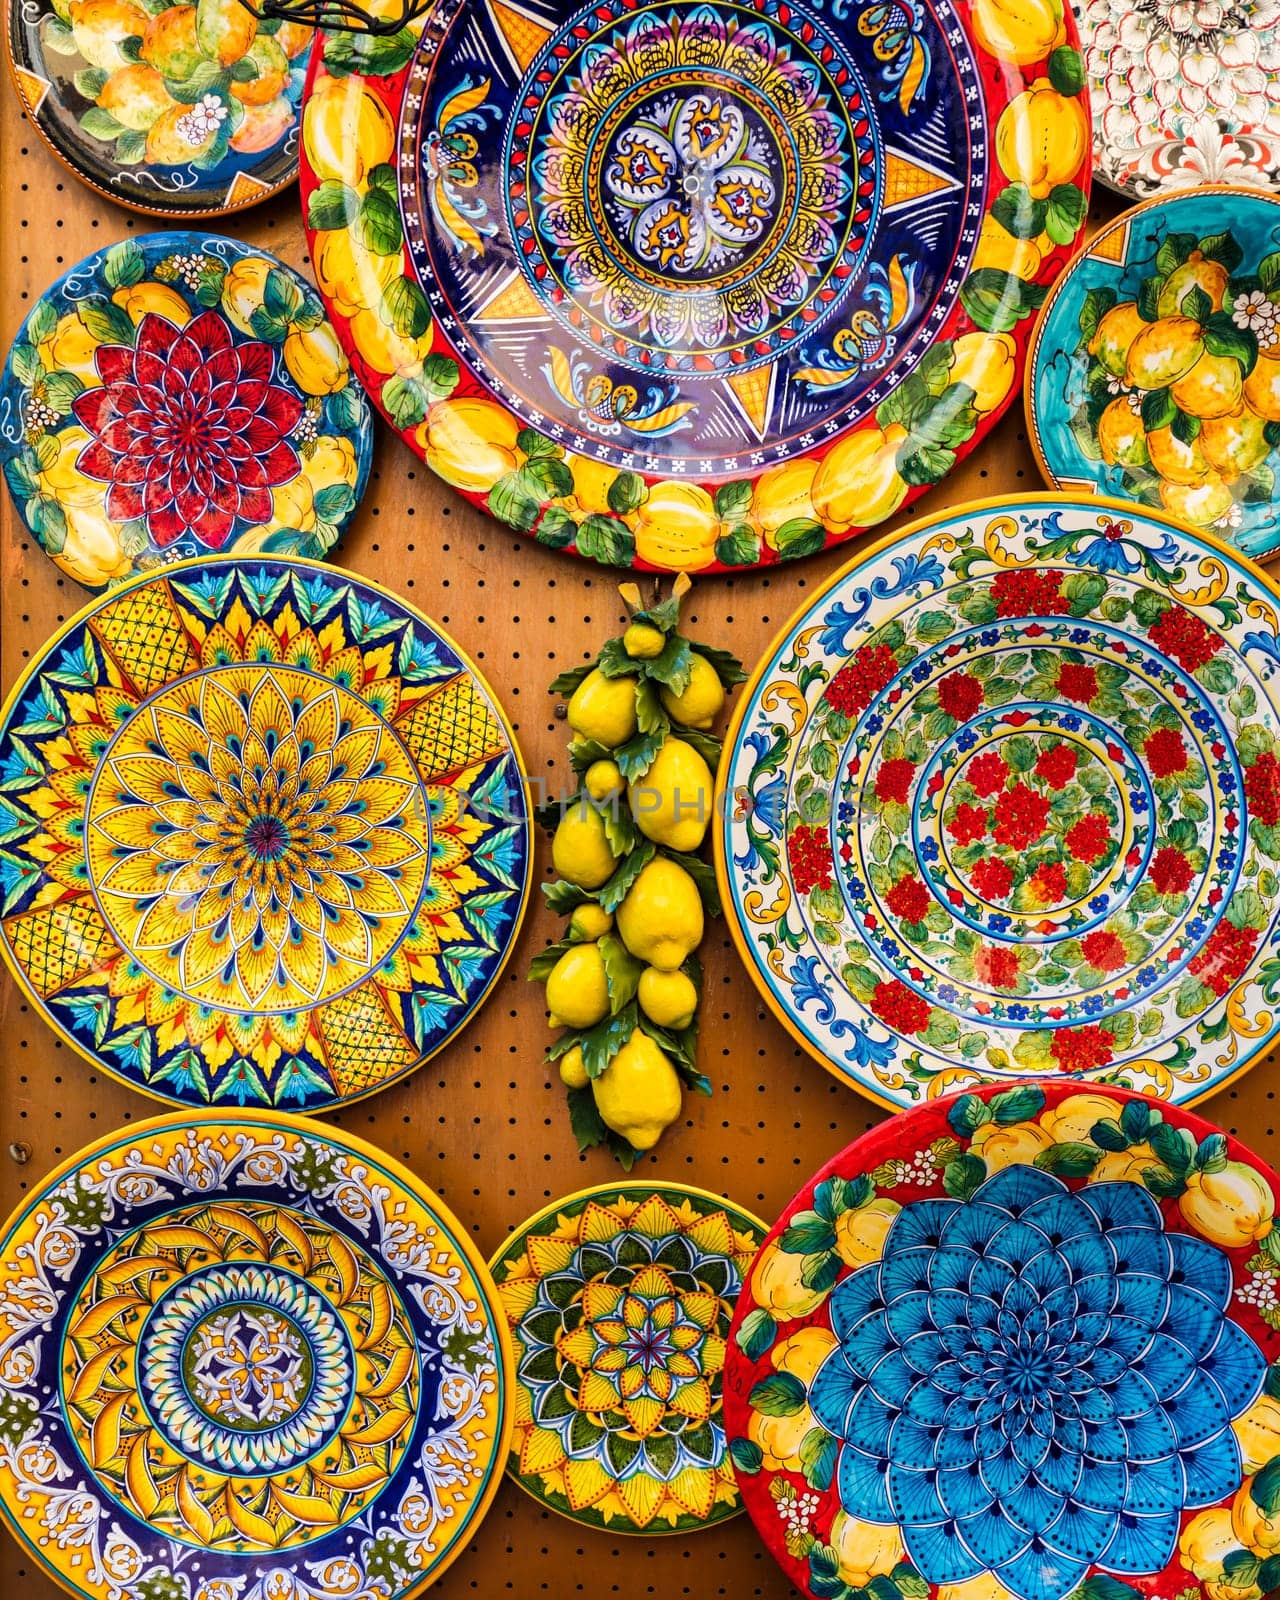 Collection of colorful Italian ceramic pottery, local craft products from Positano, Italy. Ceramic plates display in Positano, Italy. Colorful of vintage ceramic plates in Positano, Italy.